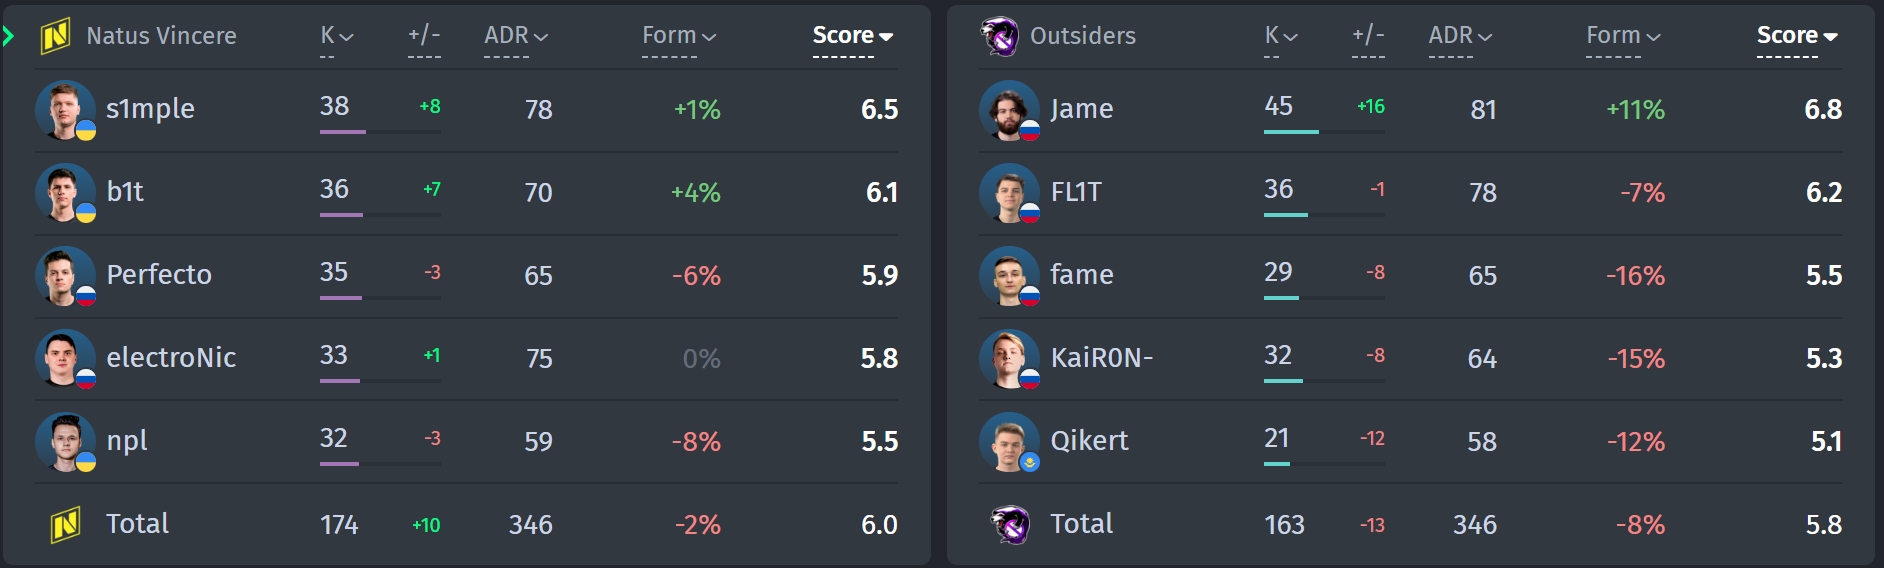 Player statistics in the match Natus Vincere — Outsiders